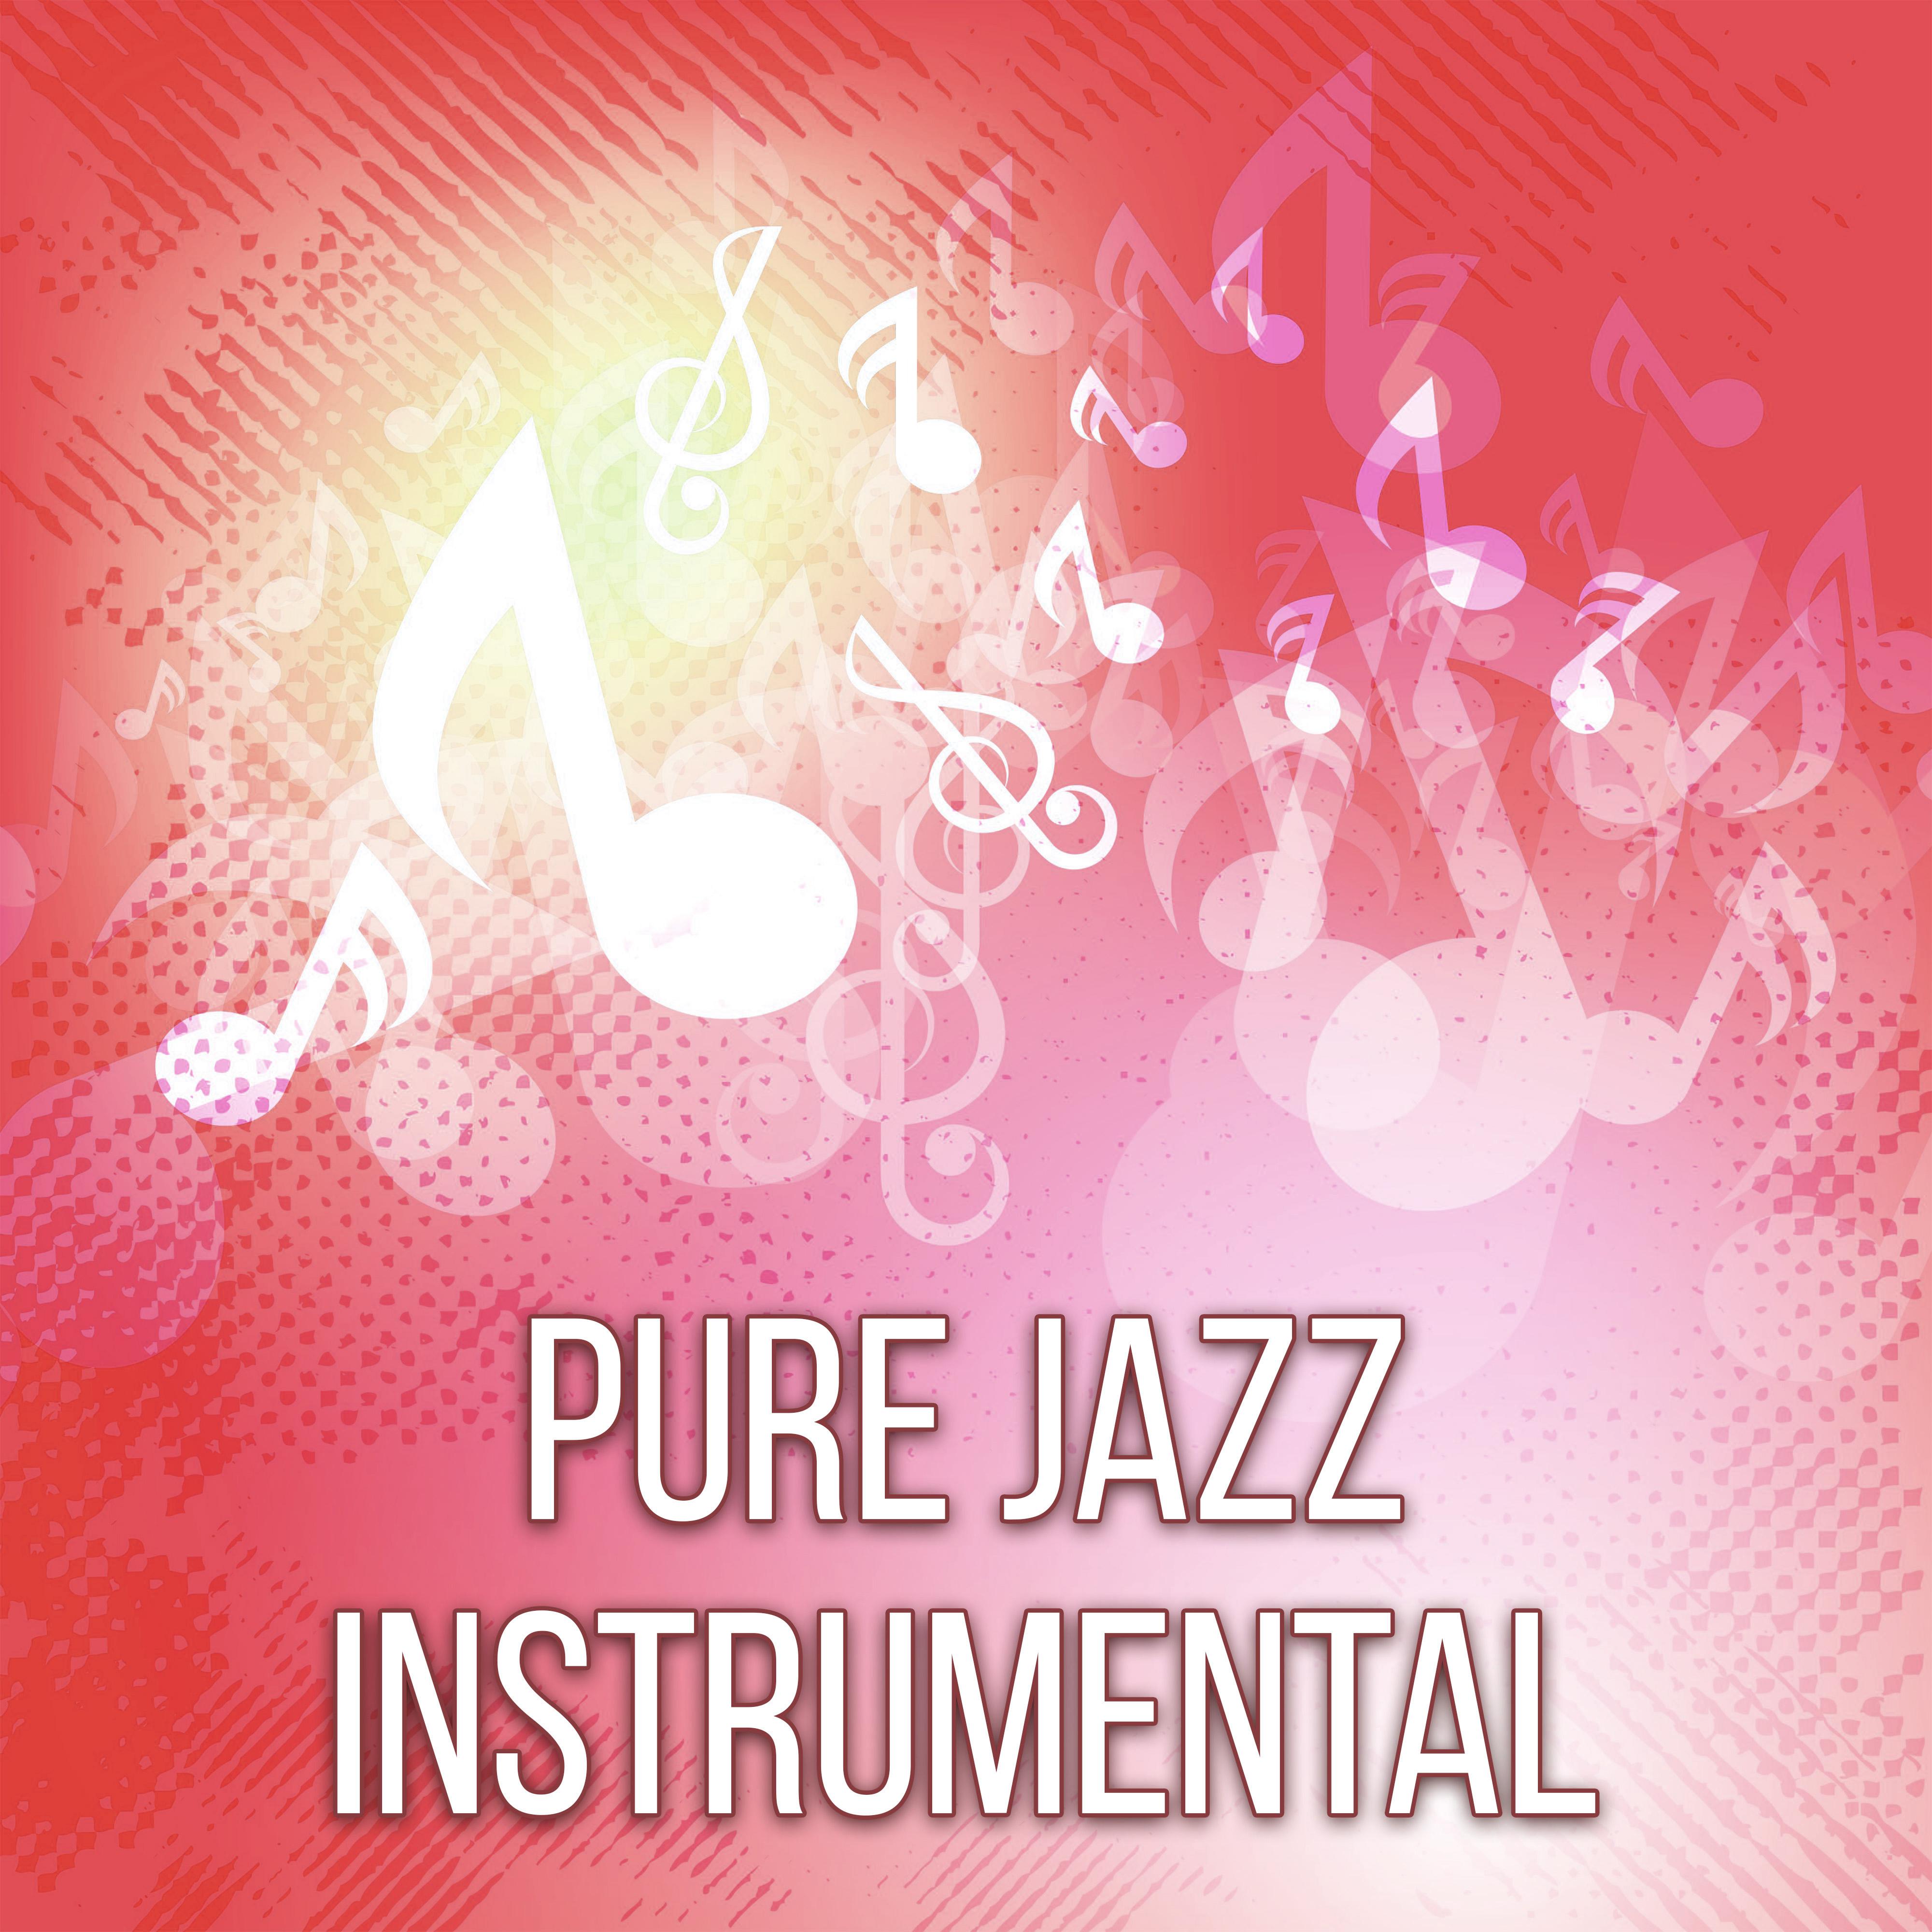 Pure Jazz Instrumental – Ambient Piano Jazz, Instrumental Session, Soothing Jazz Lounge, Finest Selected